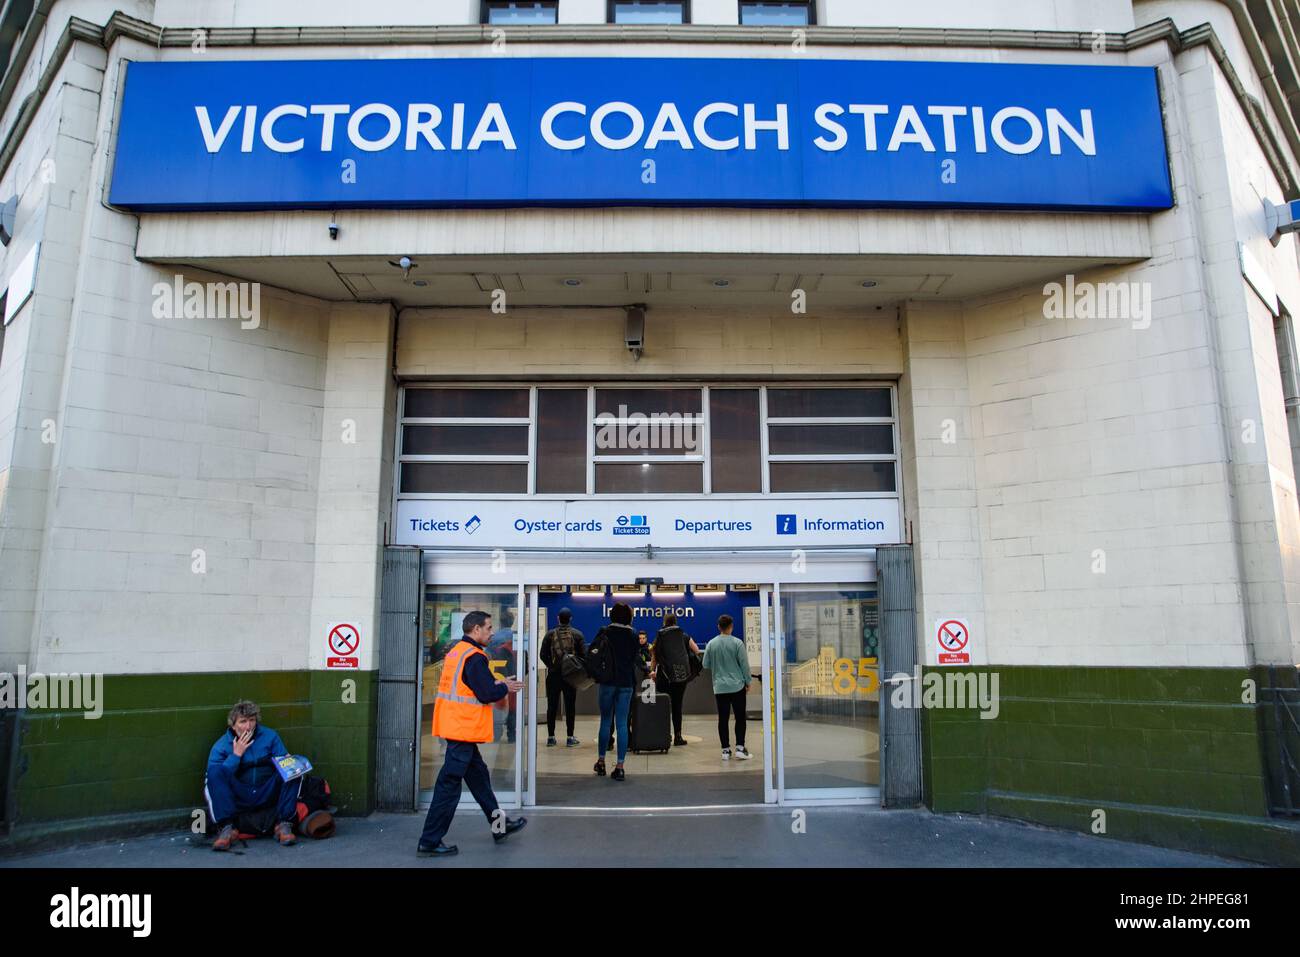 Victoria Coach Station, the largest coach station in London, United Kingdom Stock Photo